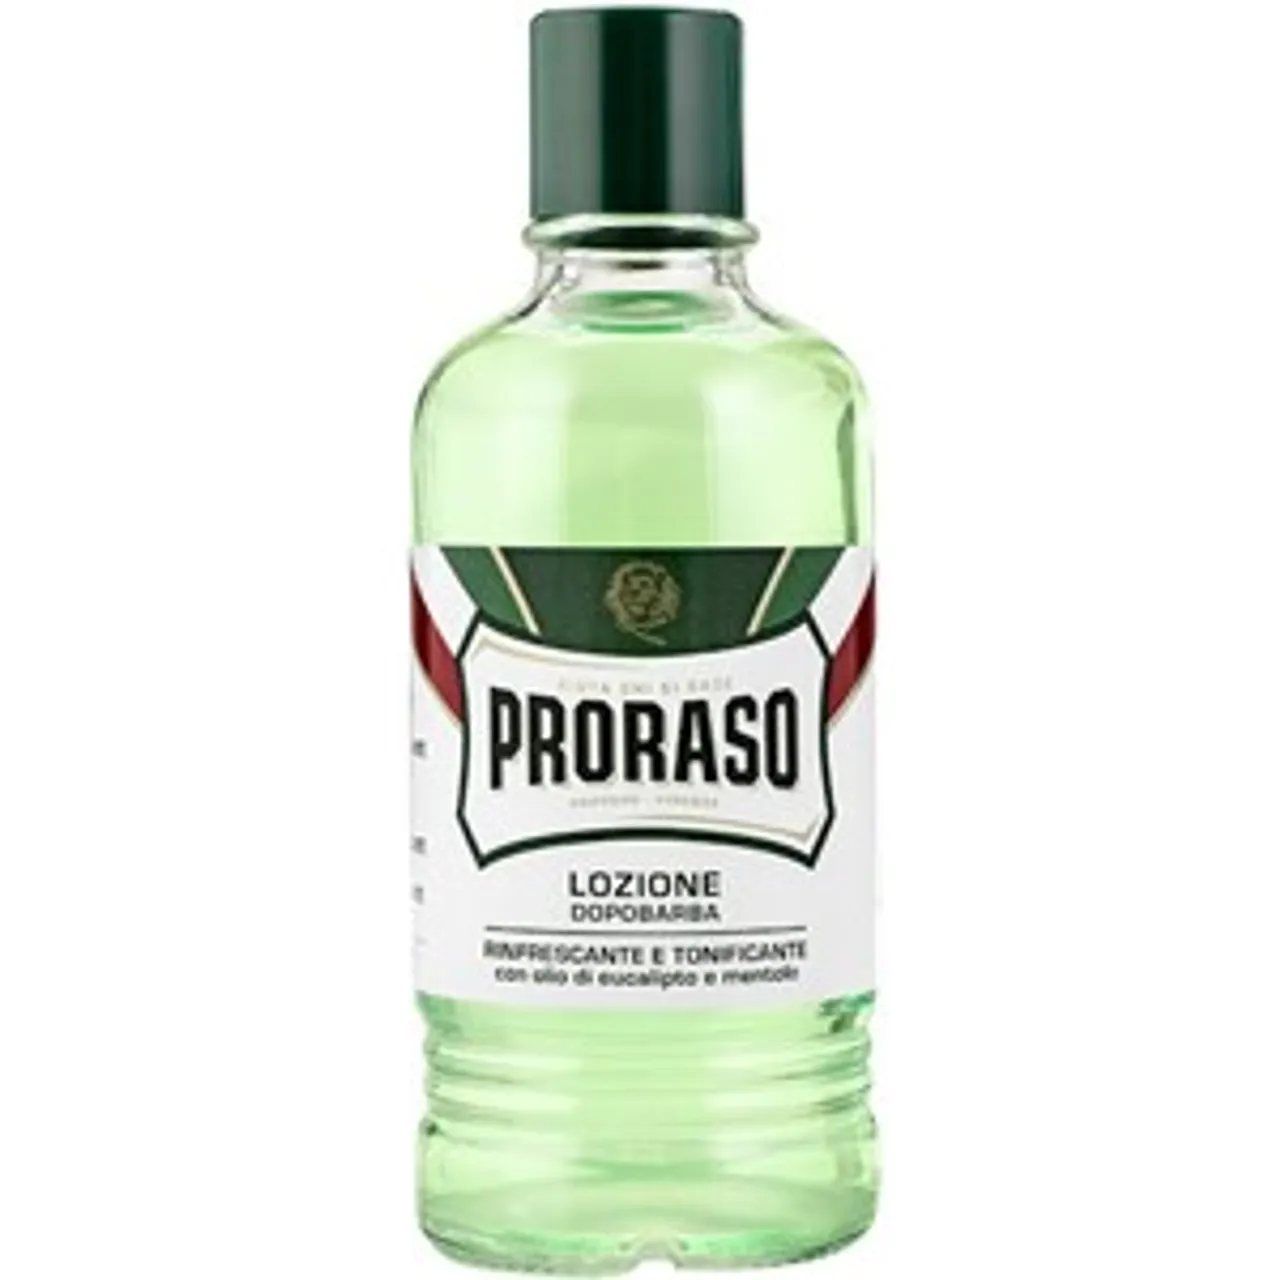 Proraso Professional After Shave Lotion Refresh Unisex 400 ml